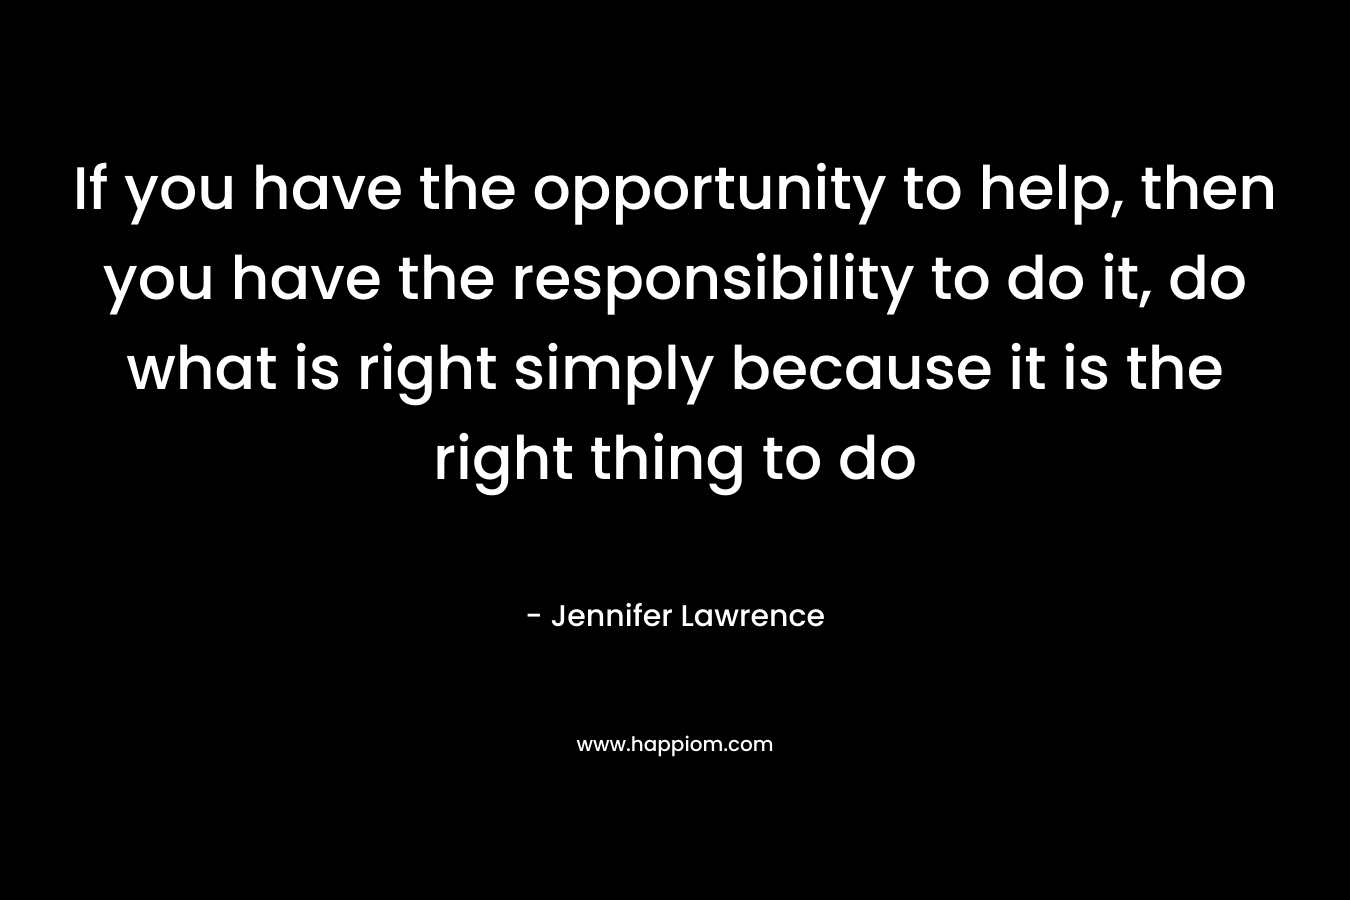 If you have the opportunity to help, then you have the responsibility to do it, do what is right simply because it is the right thing to do